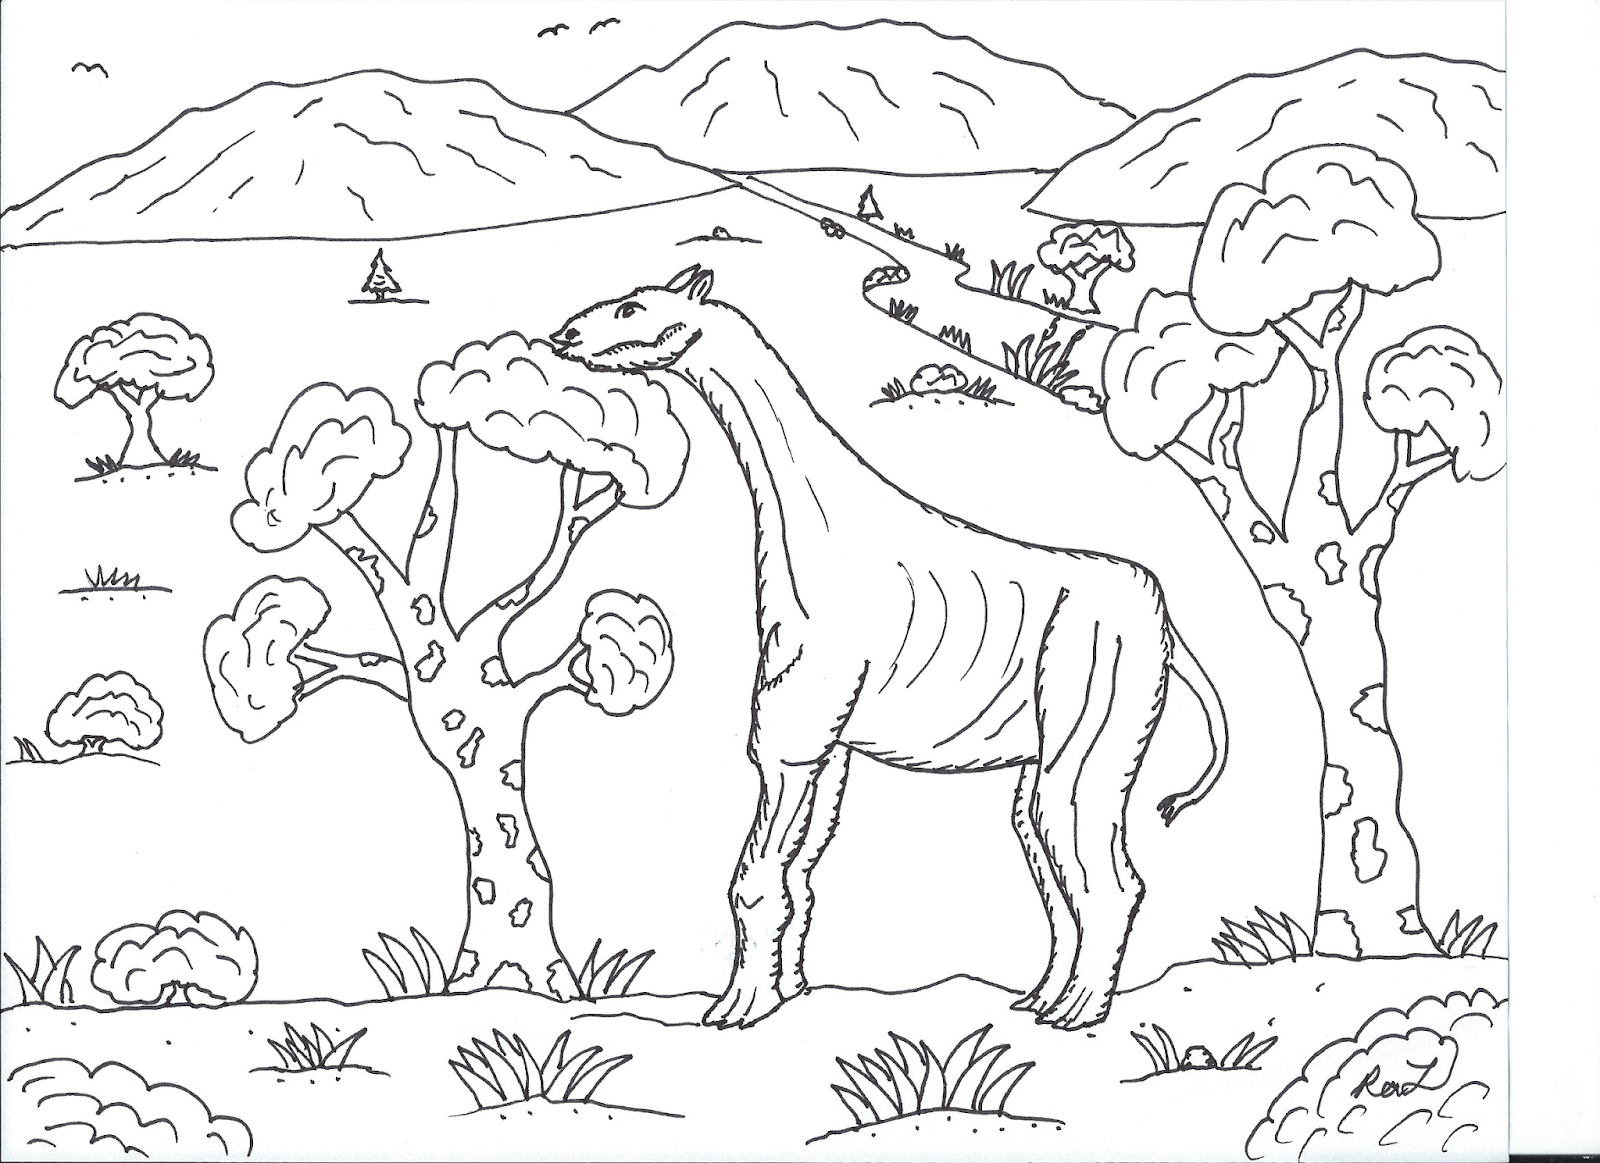 Download Robin's Great Coloring Pages: Prehistoric Mammals with Modern Mammals for Comparison